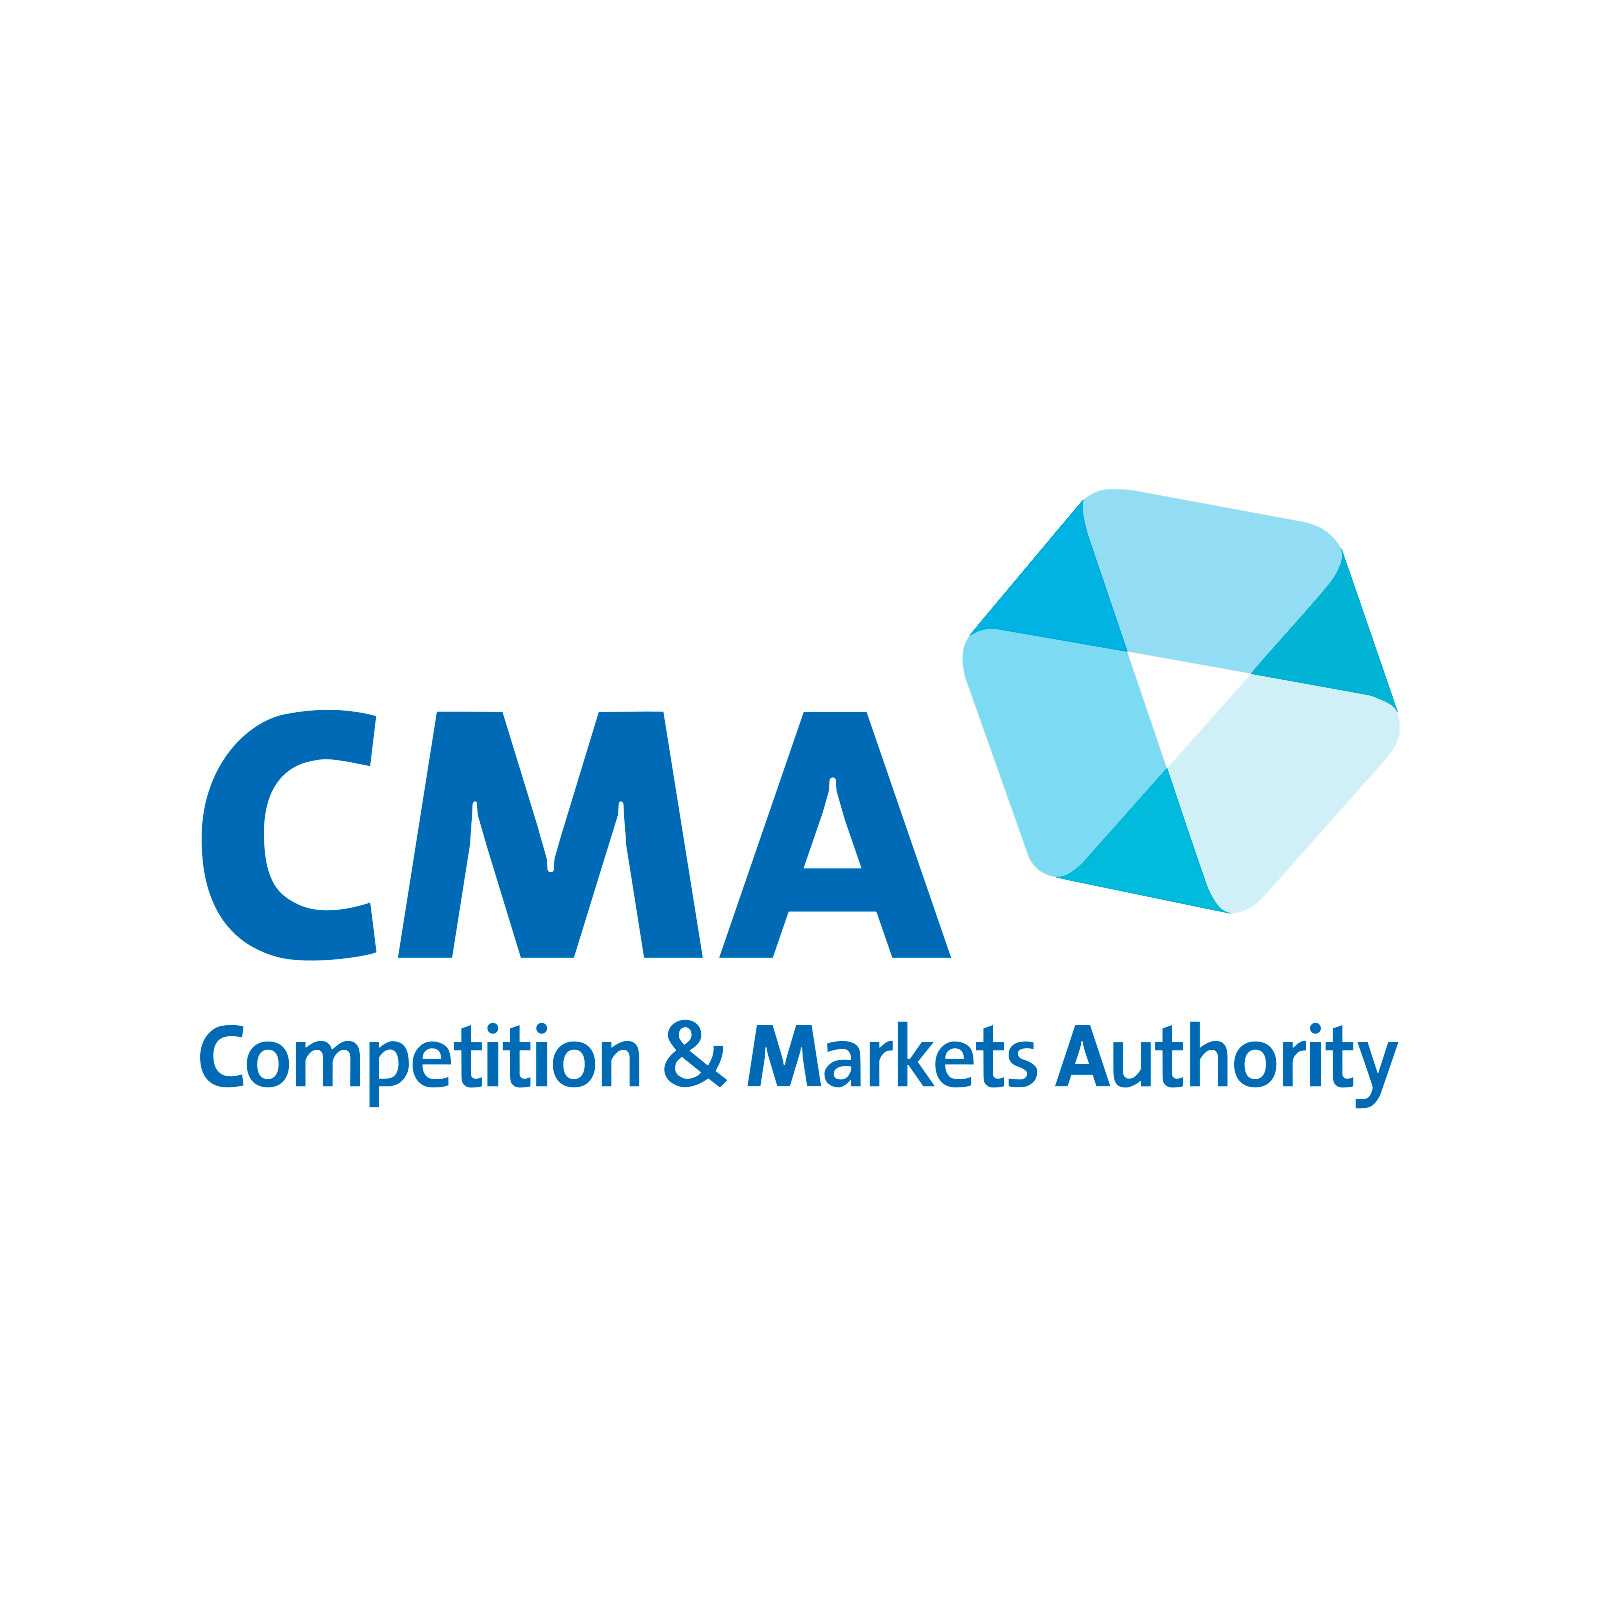 uk competition and markets authority logo